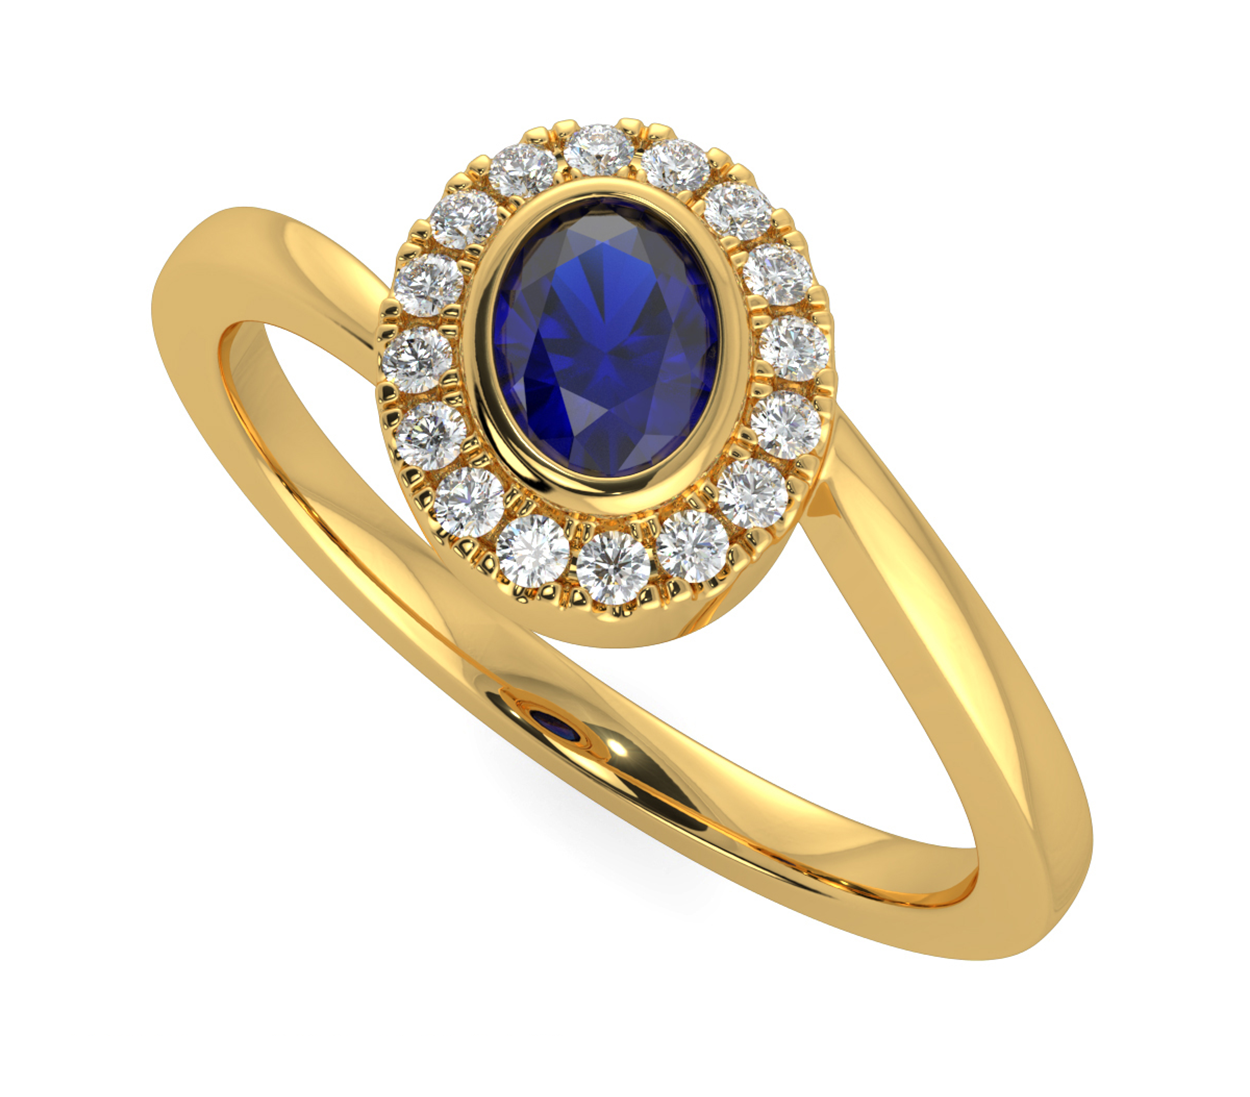 CFXNMZGR Rings for Women Bright Zircon Ring Round Blue Stone Jewelry  Fashion Jewelry Engaged Ring for Women - Walmart.com